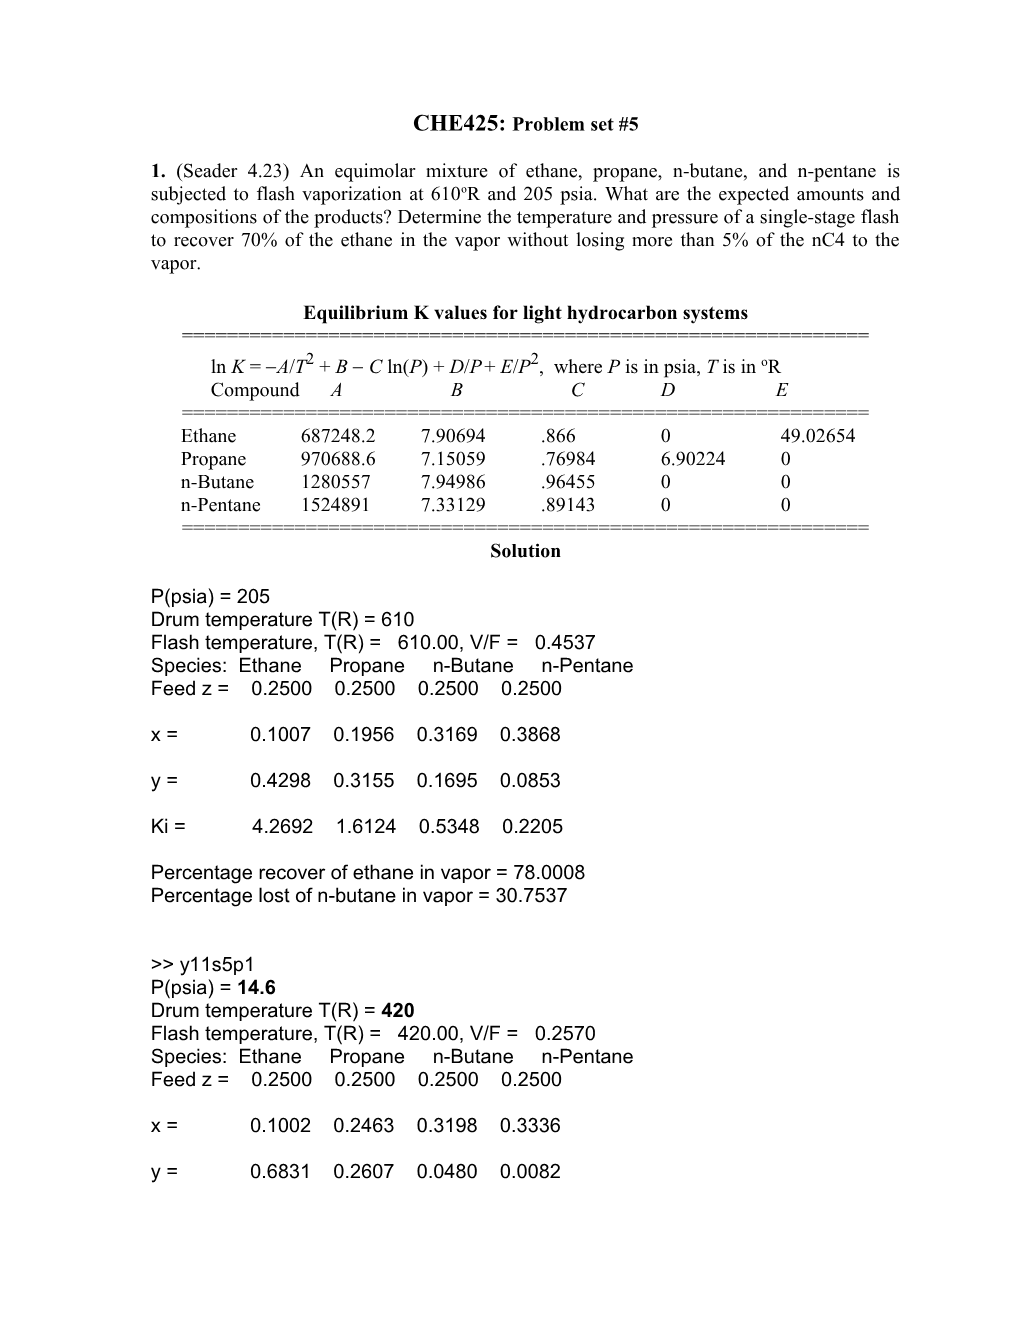 Equilibrium K Values for Light Hydrocarbon Systems